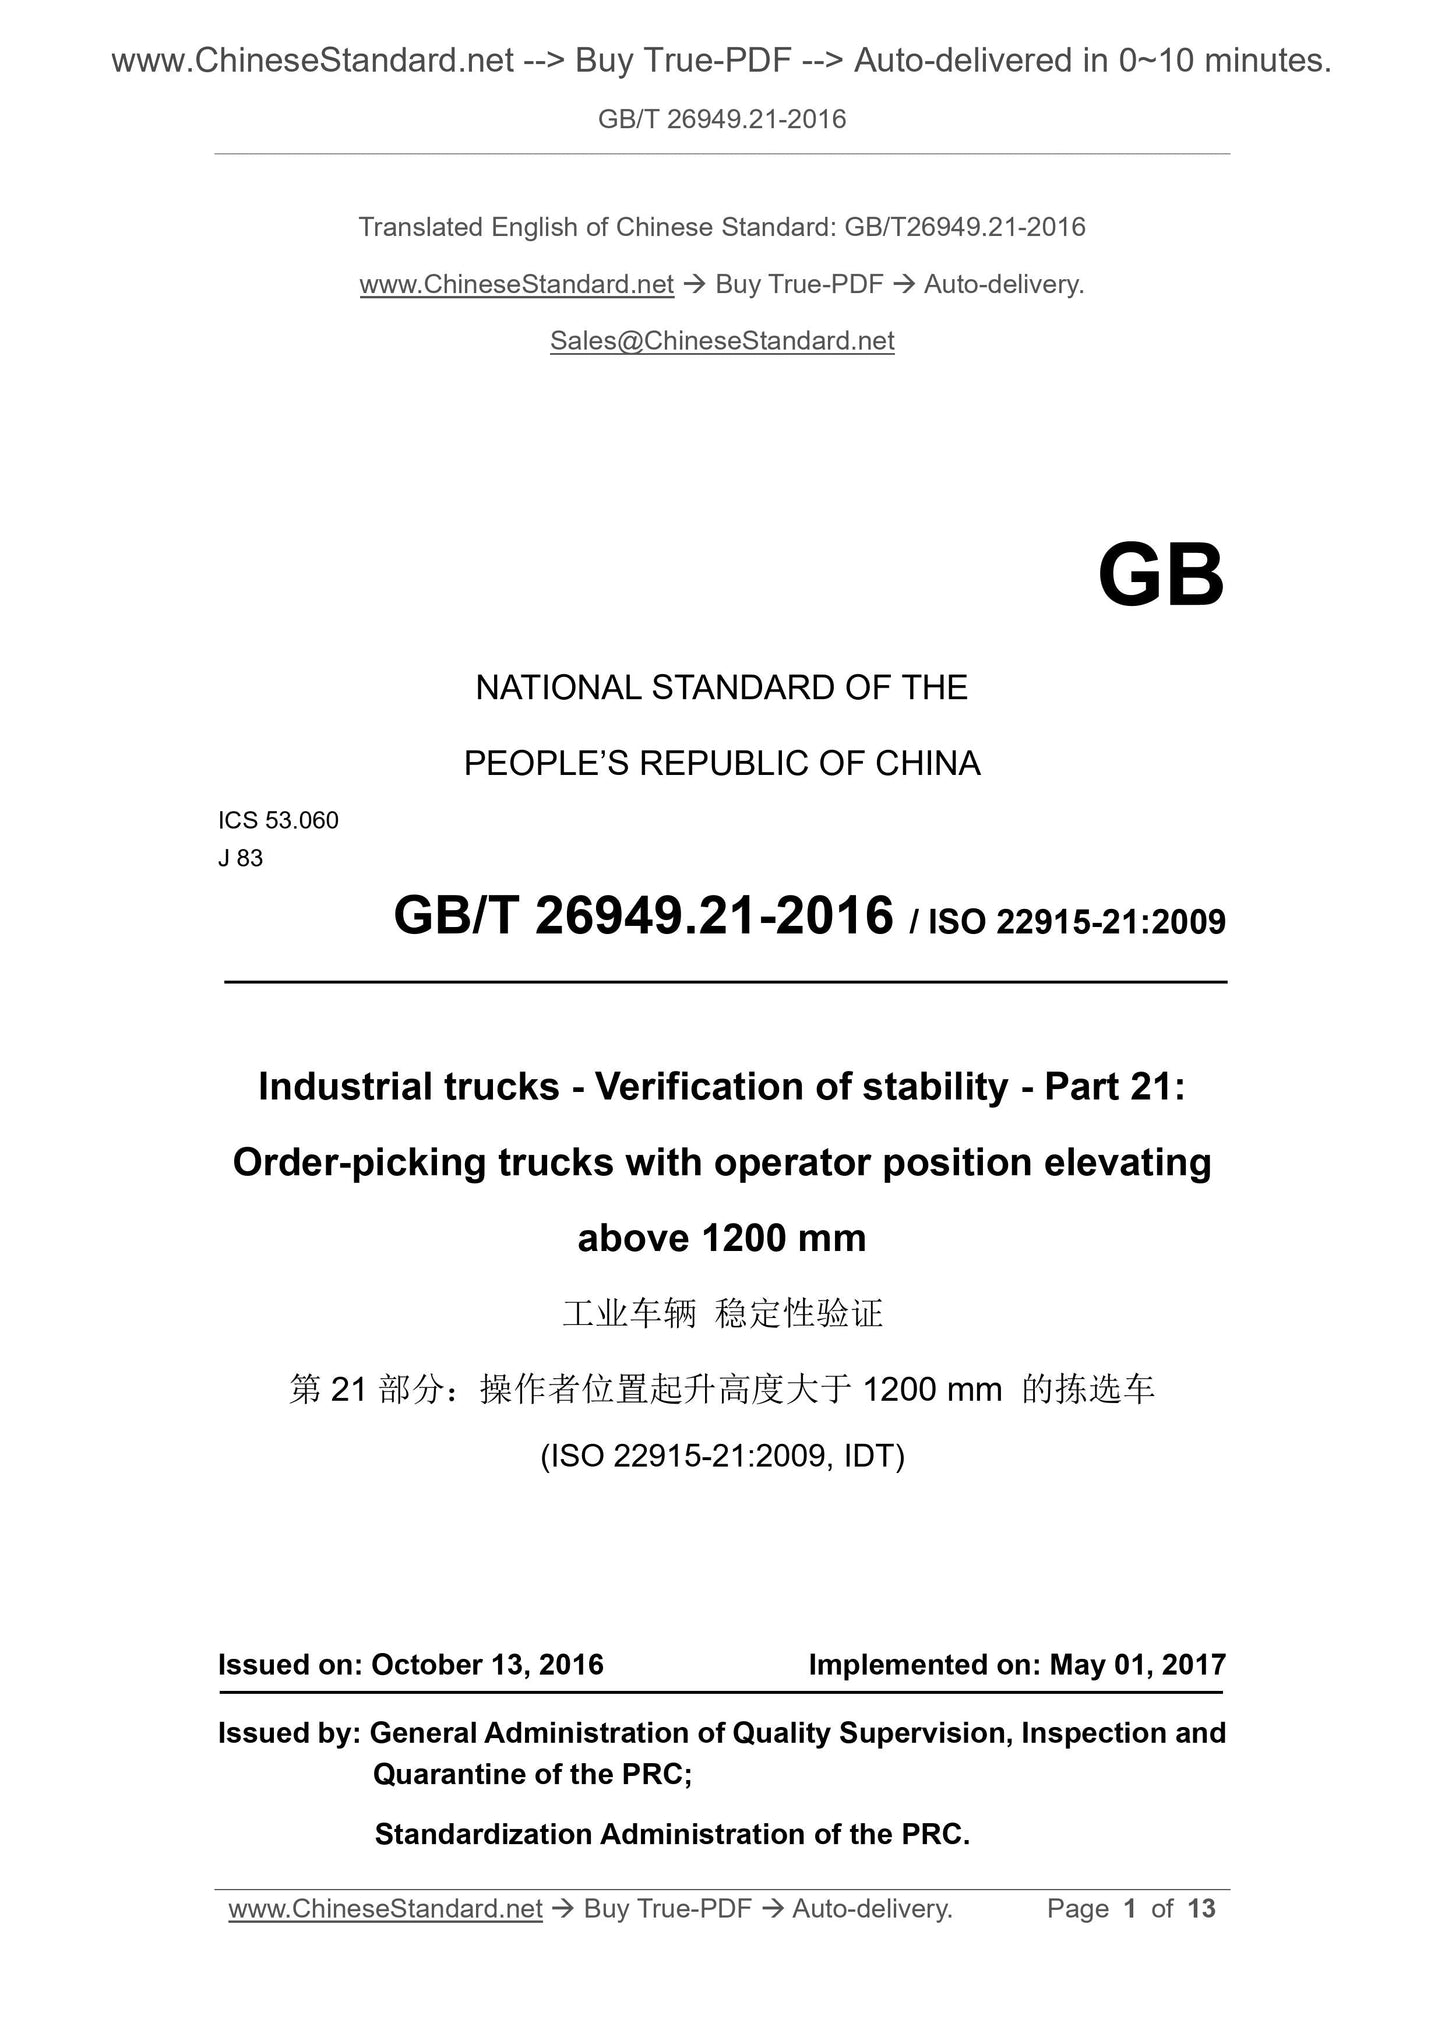 GB/T 26949.21-2016 Page 1